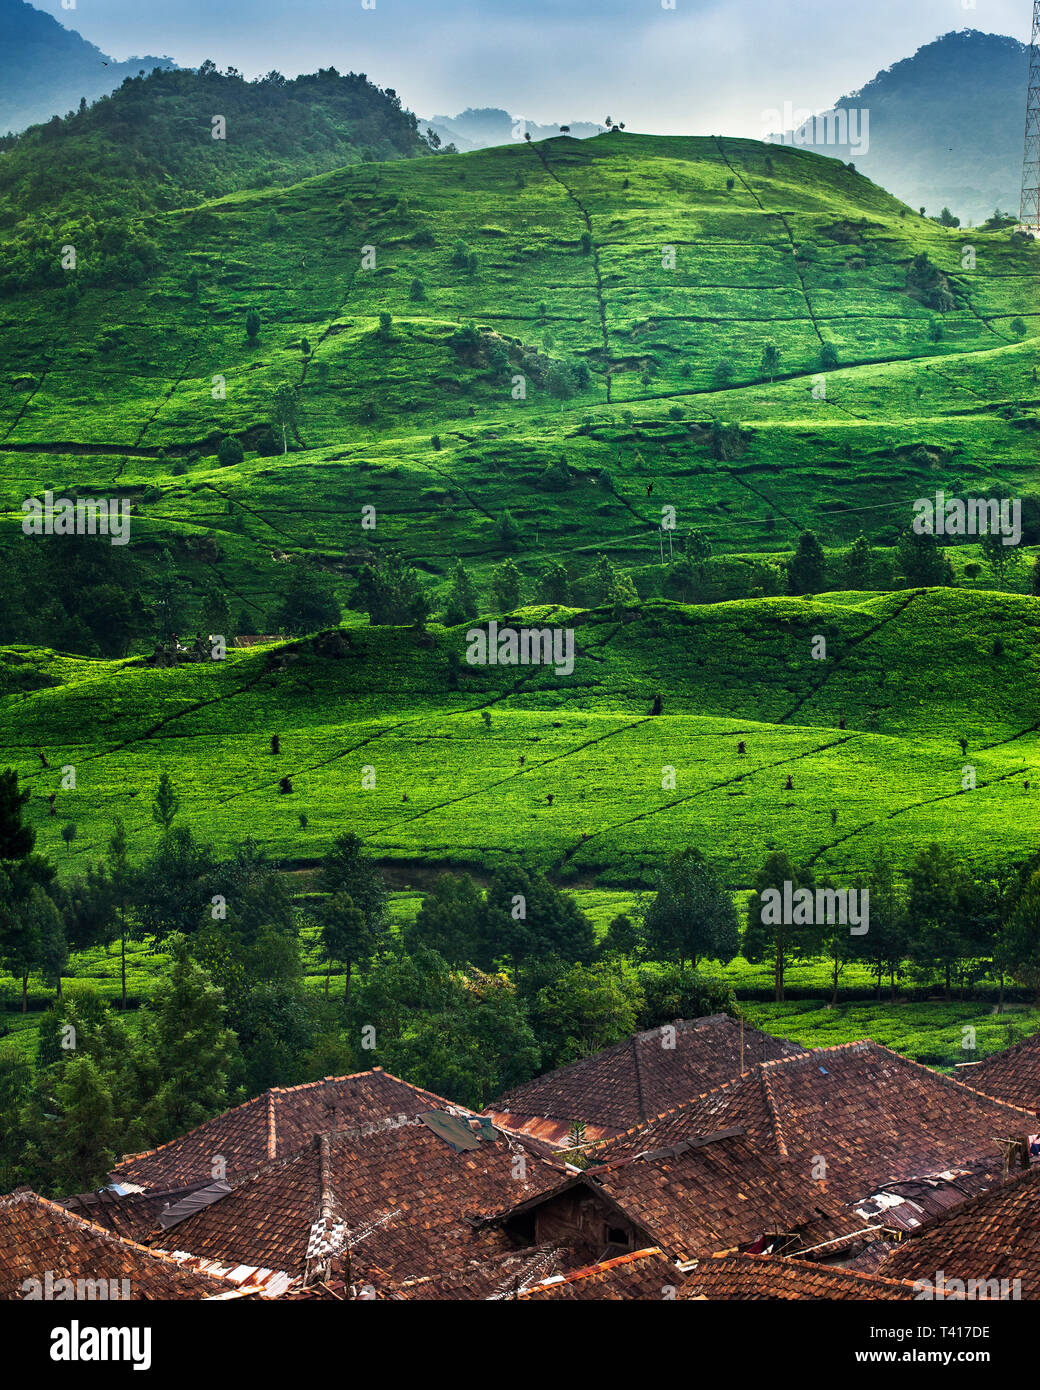 Tropical forest and mountain landscape, Indonesia Stock Photo